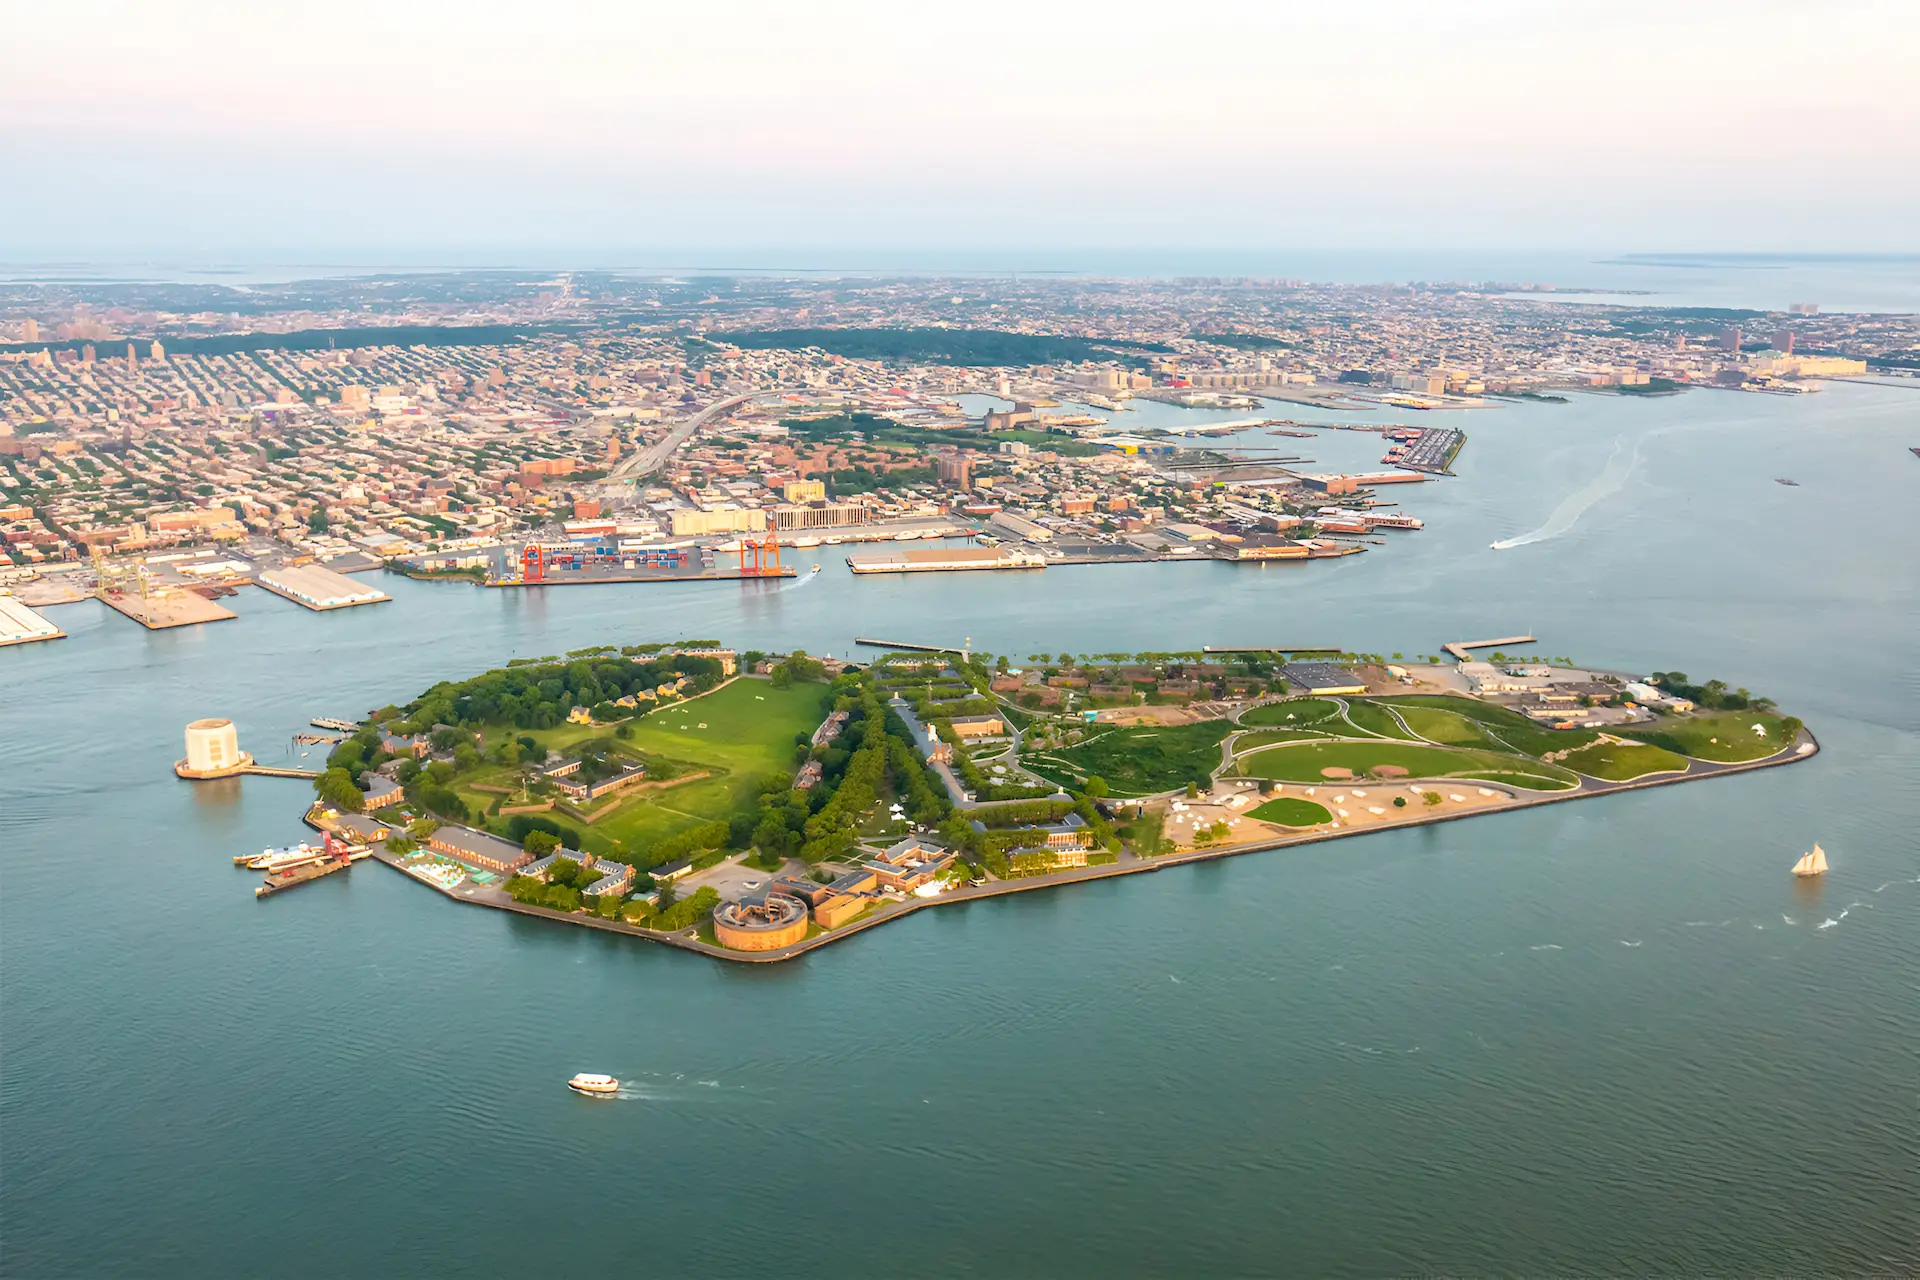 Aerial view of Governors Island